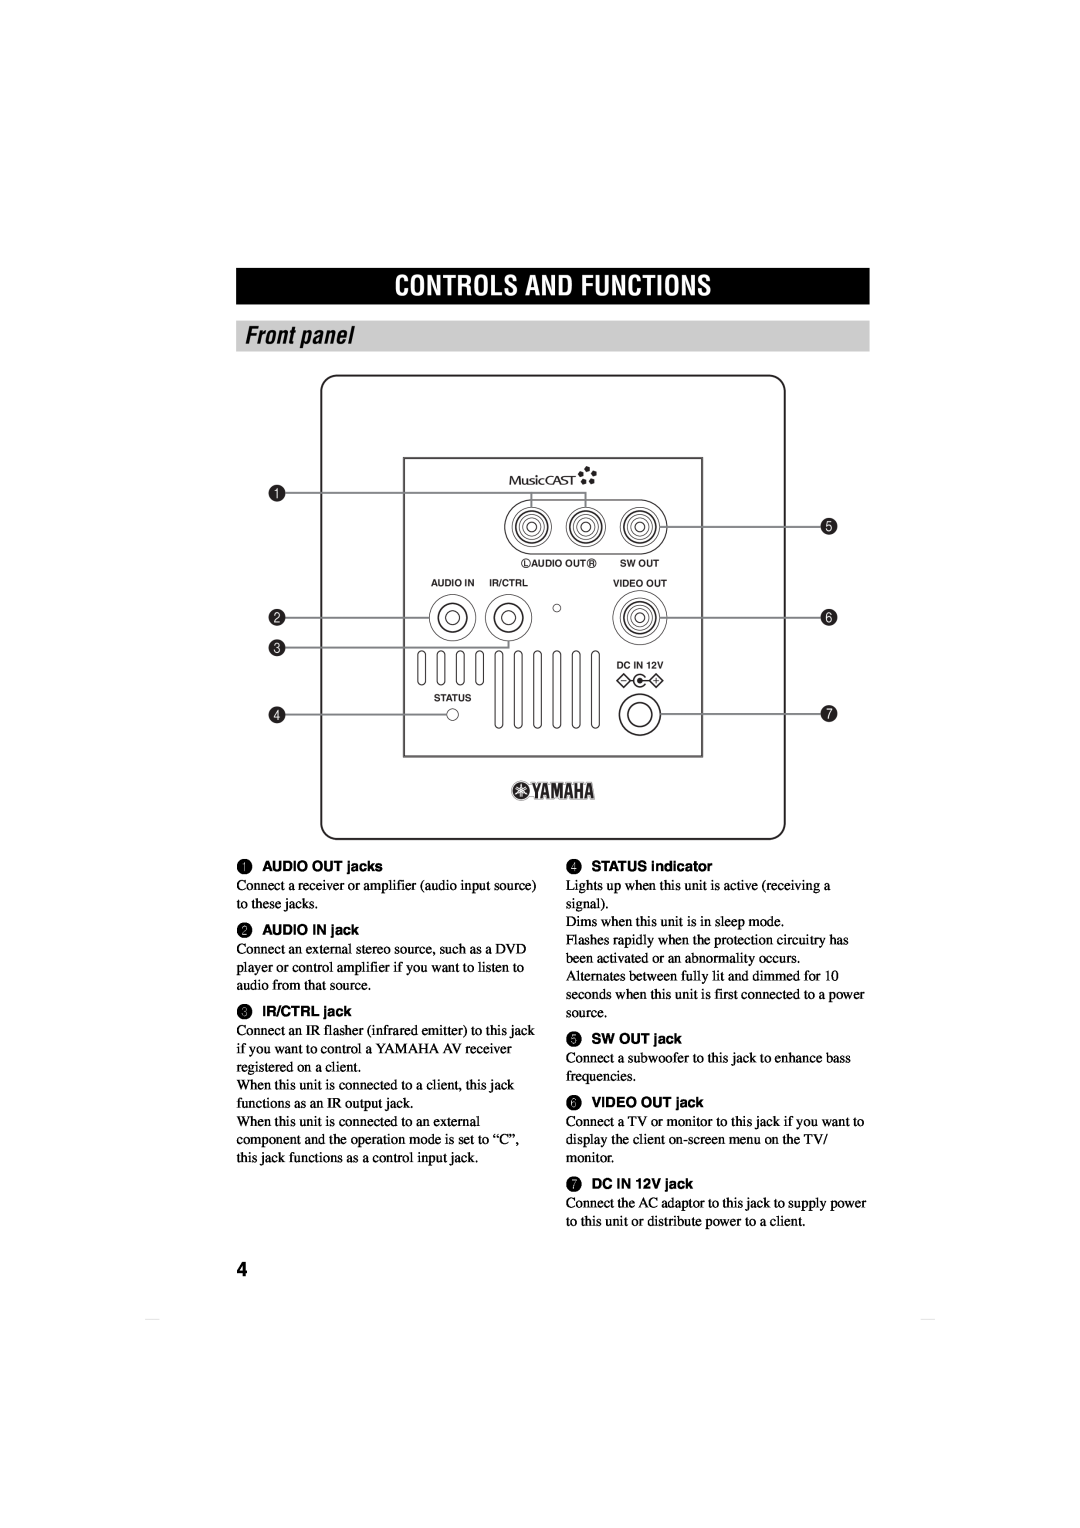 Yamaha MCX-CA15 owner manual Controls And Functions, Front panel 